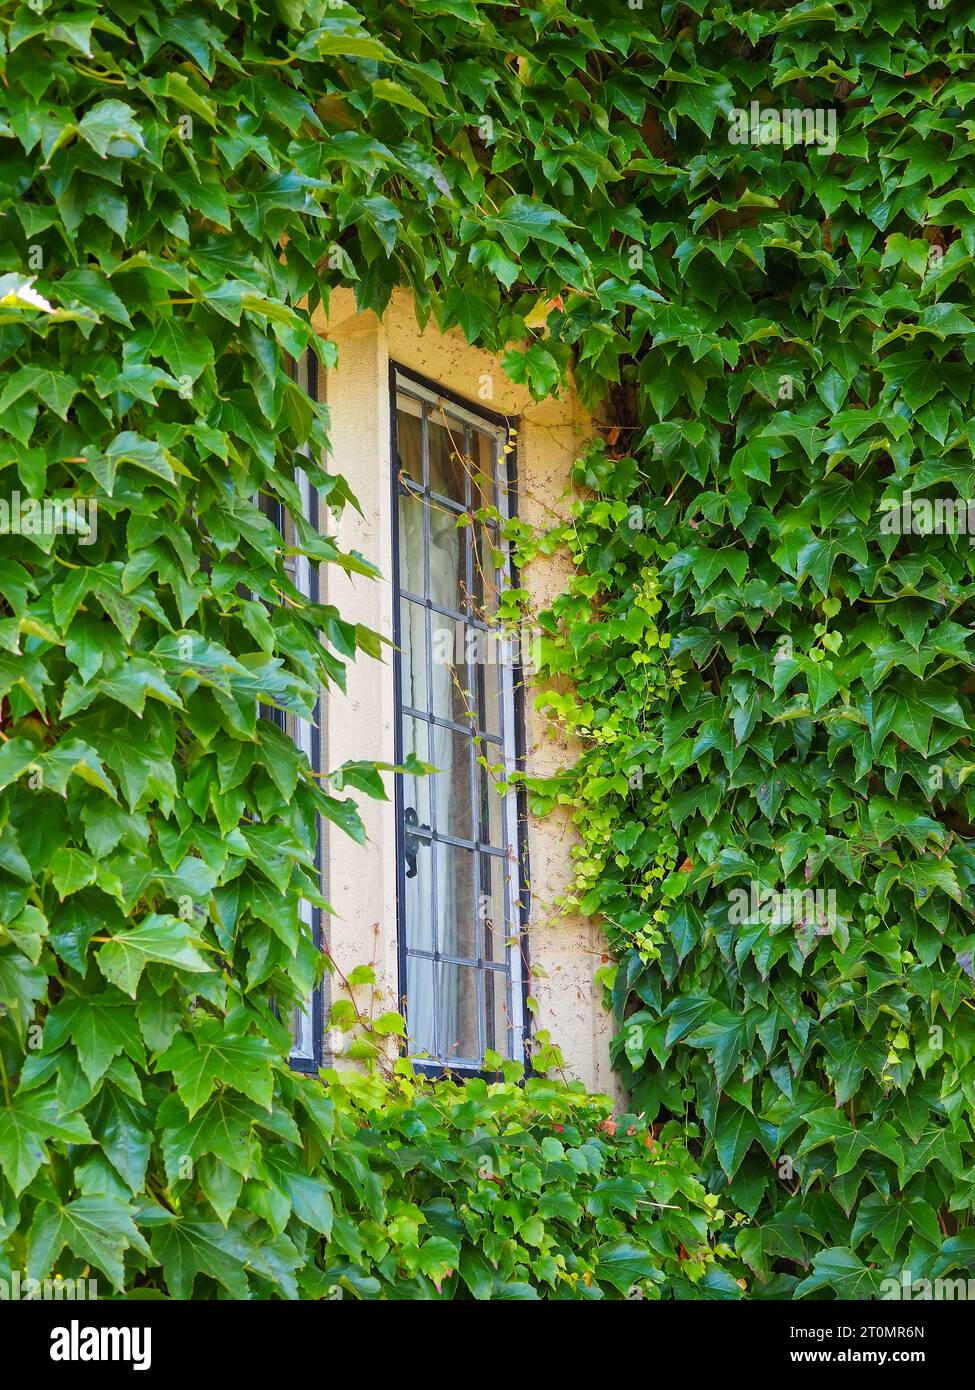 Old leaded window in a stone building surrounded by fresh green climbing, self-clinging ivy (Hedera) evergreen foliage Stock Photo